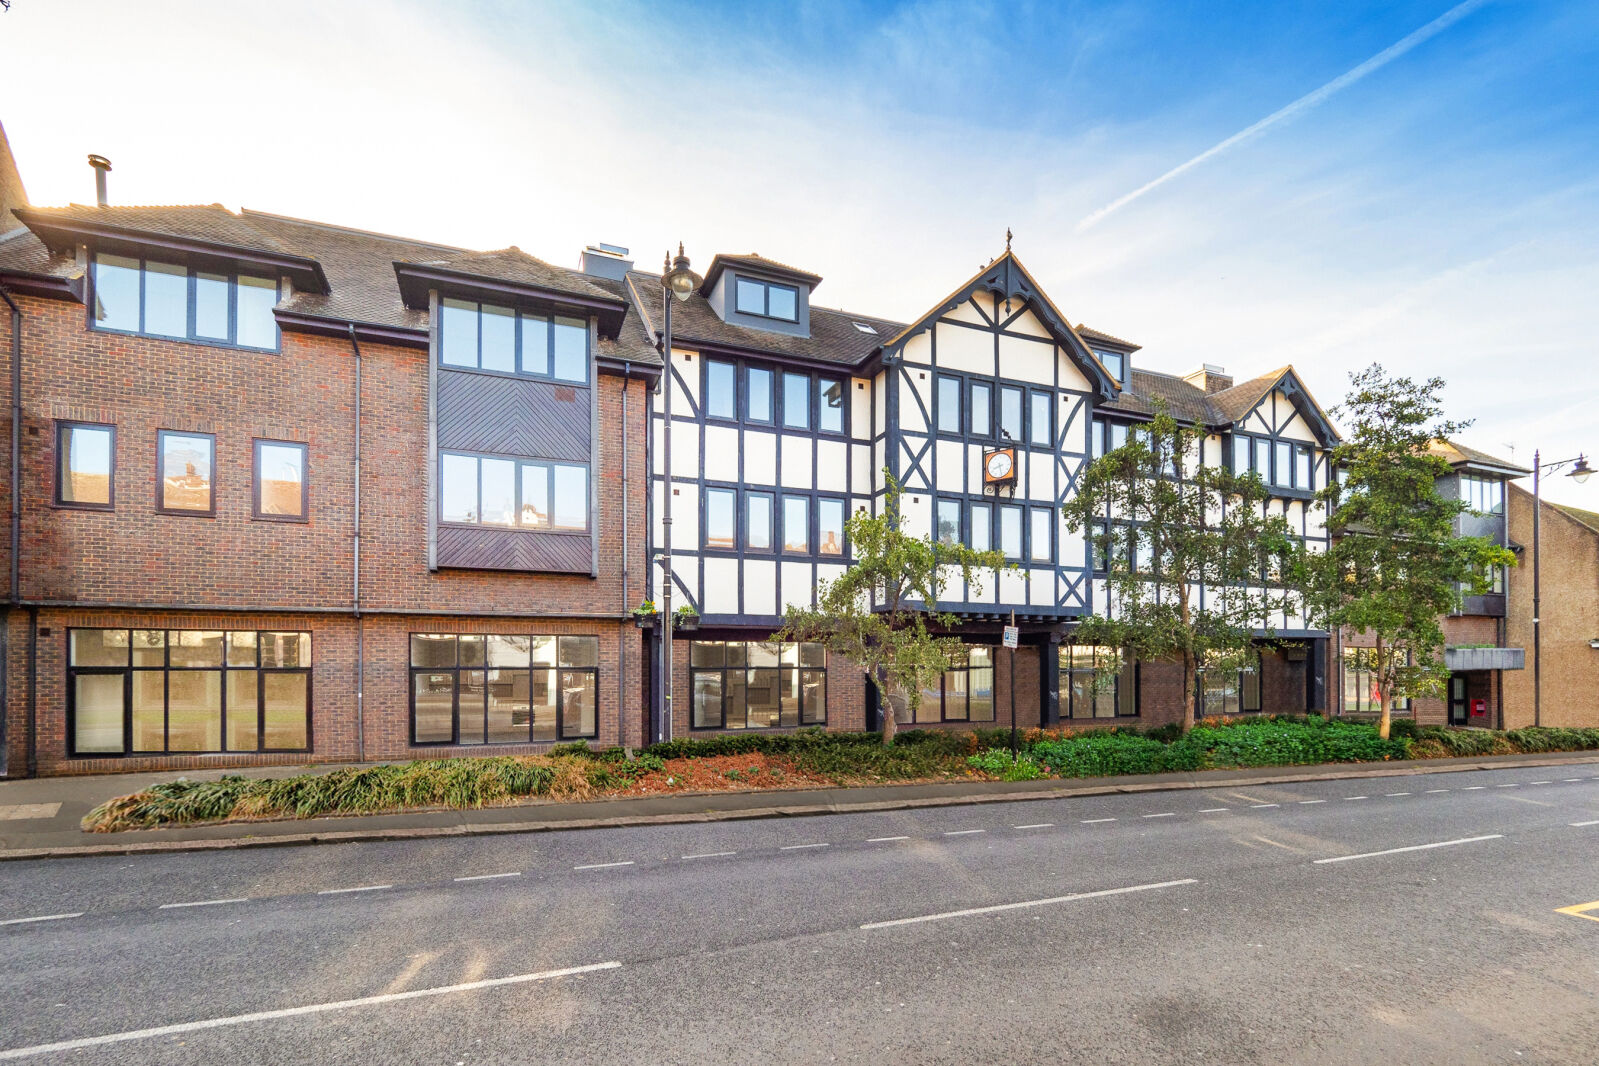 2 bedroom  flat for sale Ewell Road, Cheam, SM3, main image